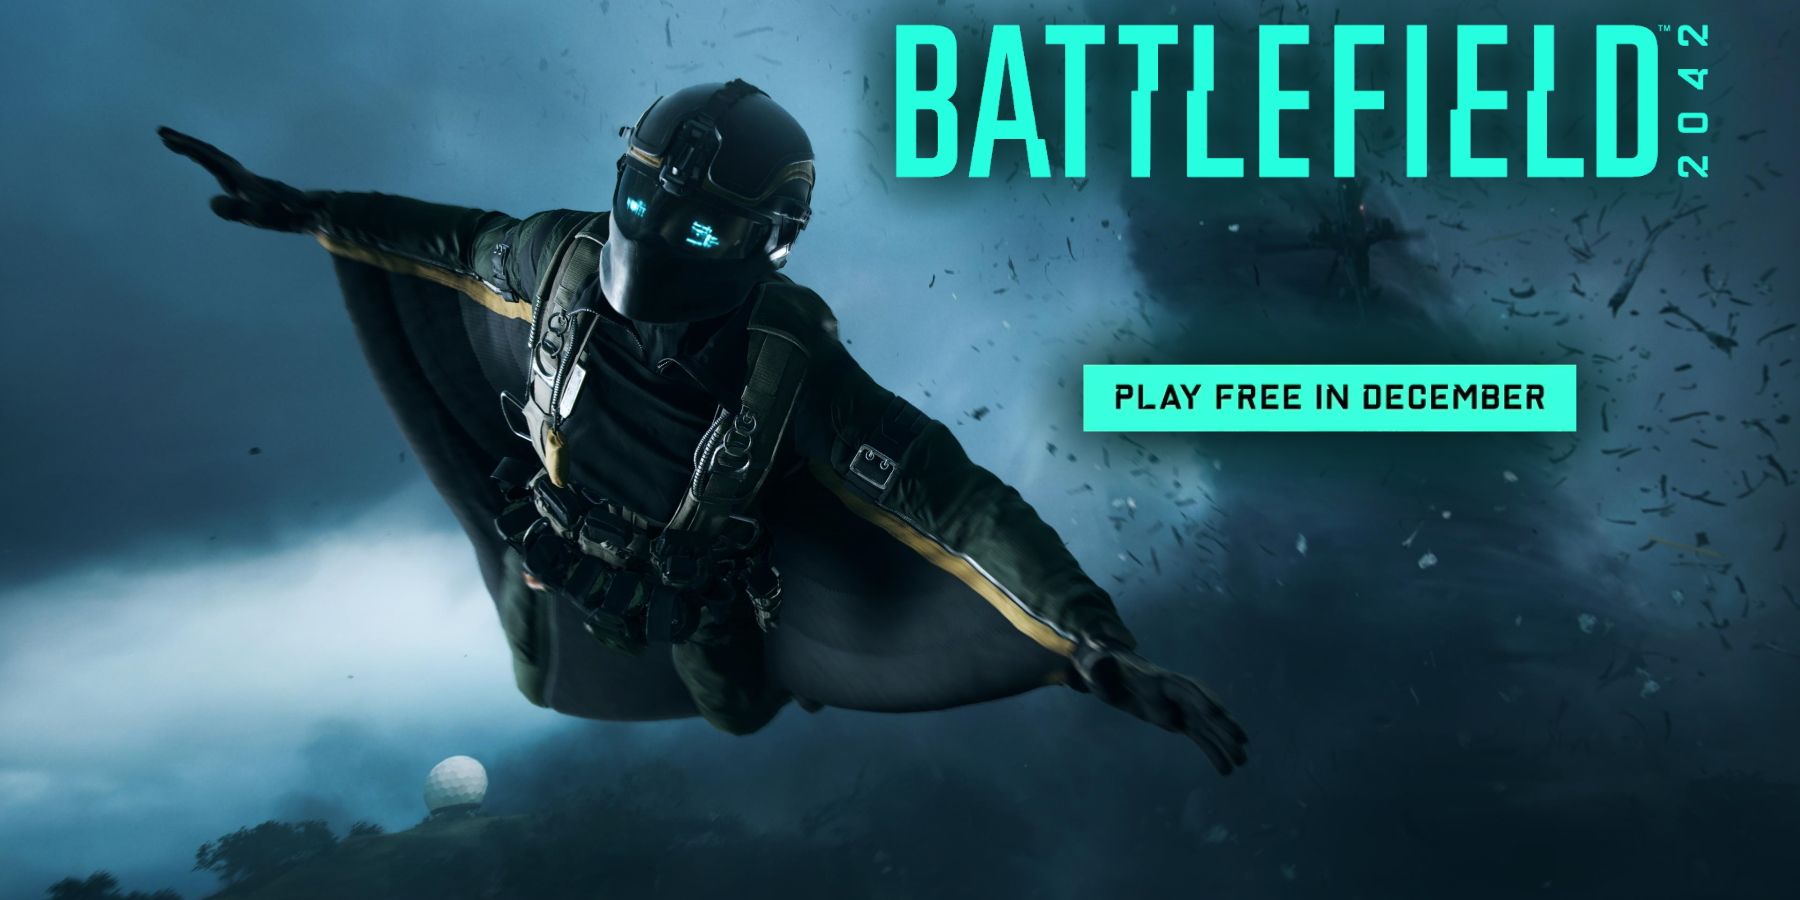 Free Play Days Has Battlefield 2042 and Akka Arrh to Sample This Weekend